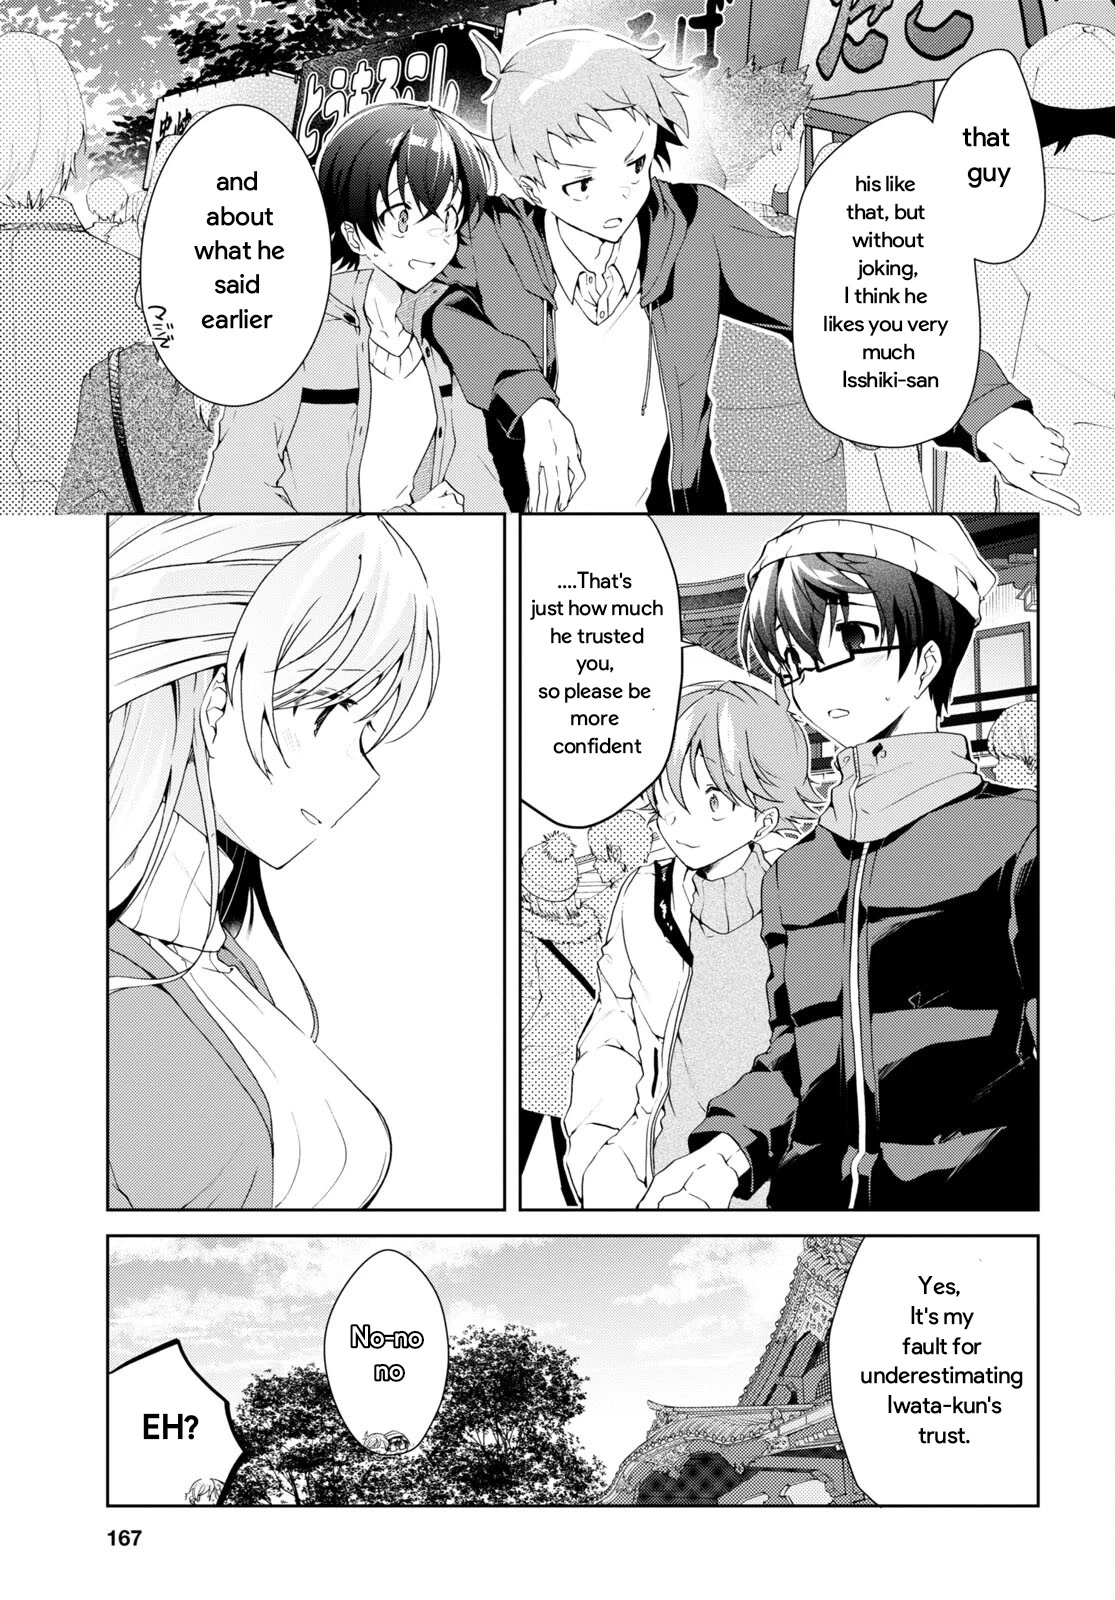 Isshiki-san Wants to Know About Love. - chapter 24.2 - #6